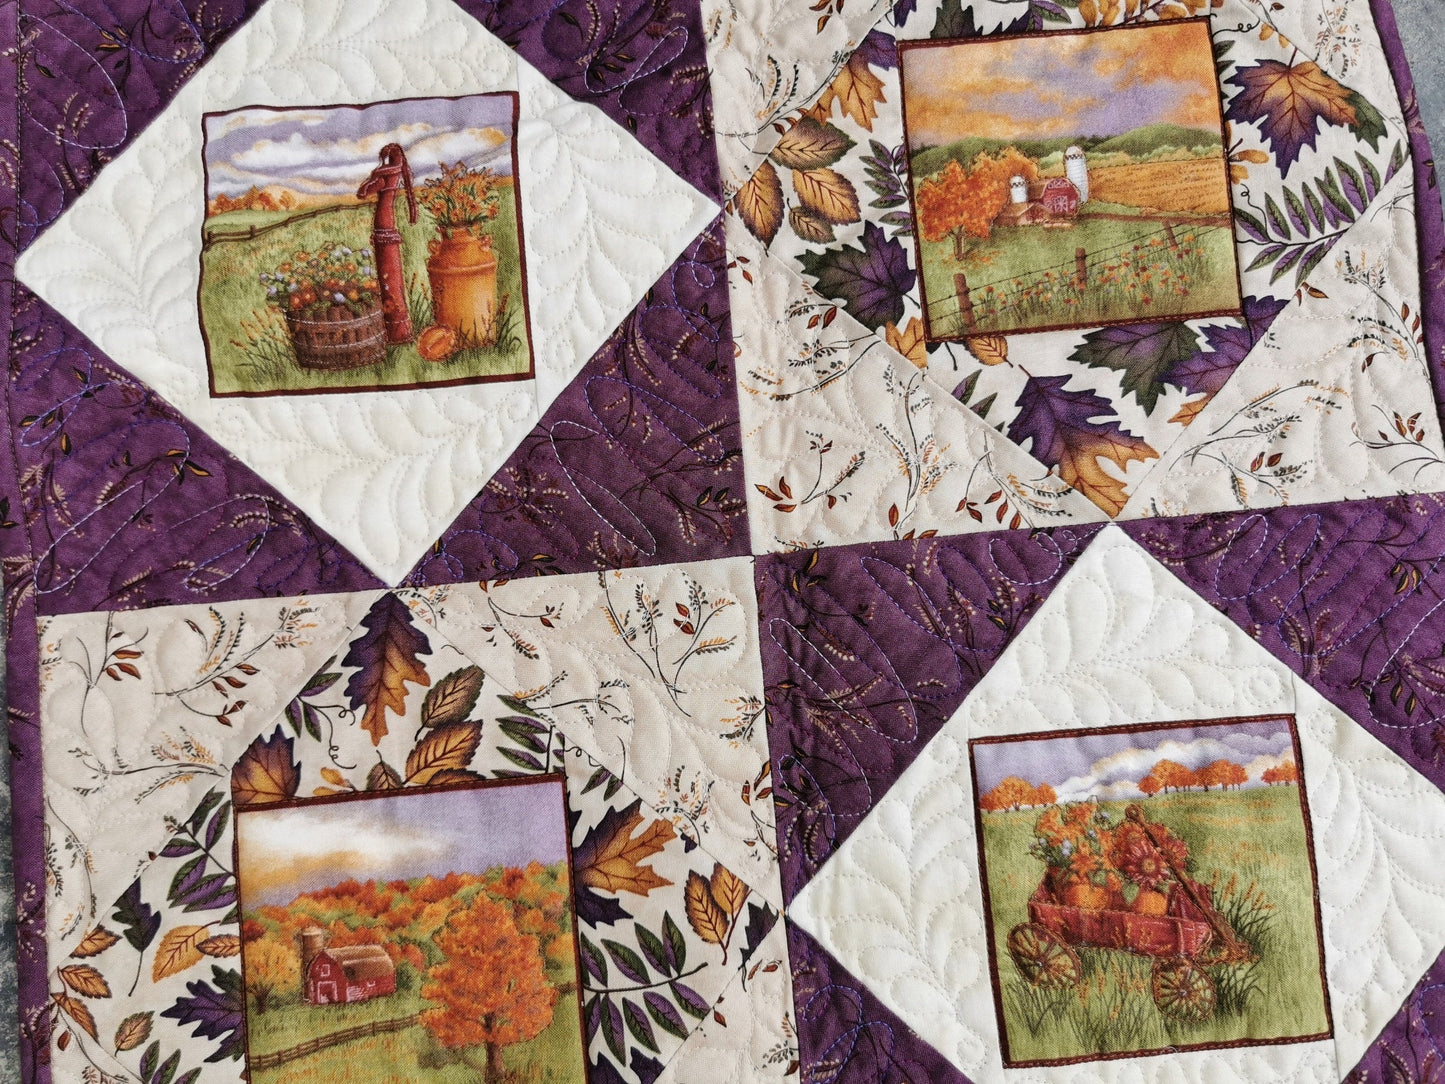 Rustic Country Farm Scene Quilt for Fall, Quilted Table Topper, Autumn Wall Quilt, Farmhouse Decor